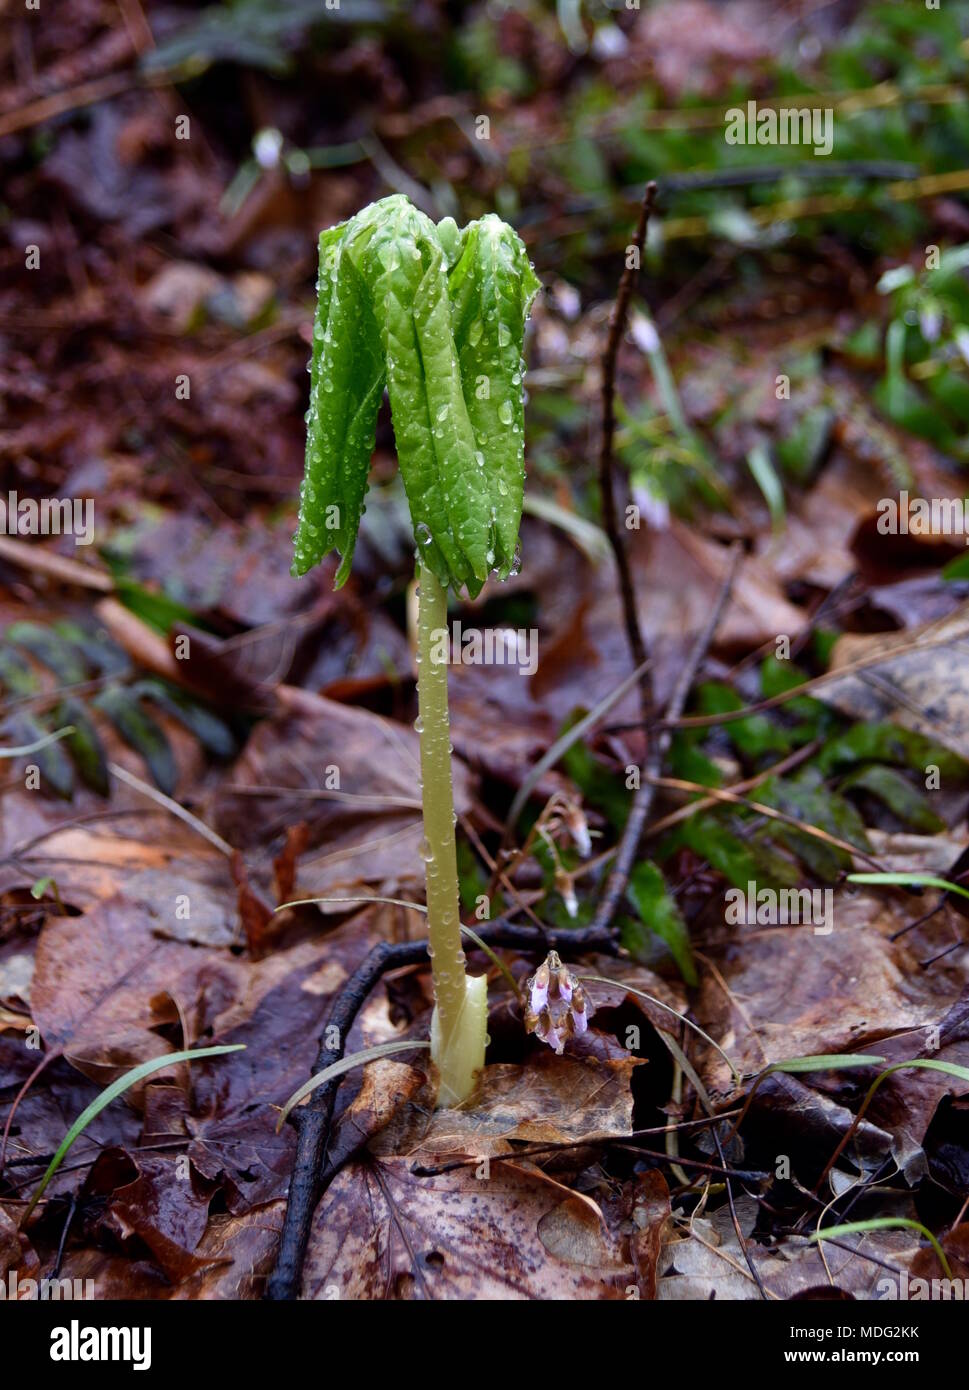 A solitary mayapple leaf emerging in a spring forest. Stock Photo